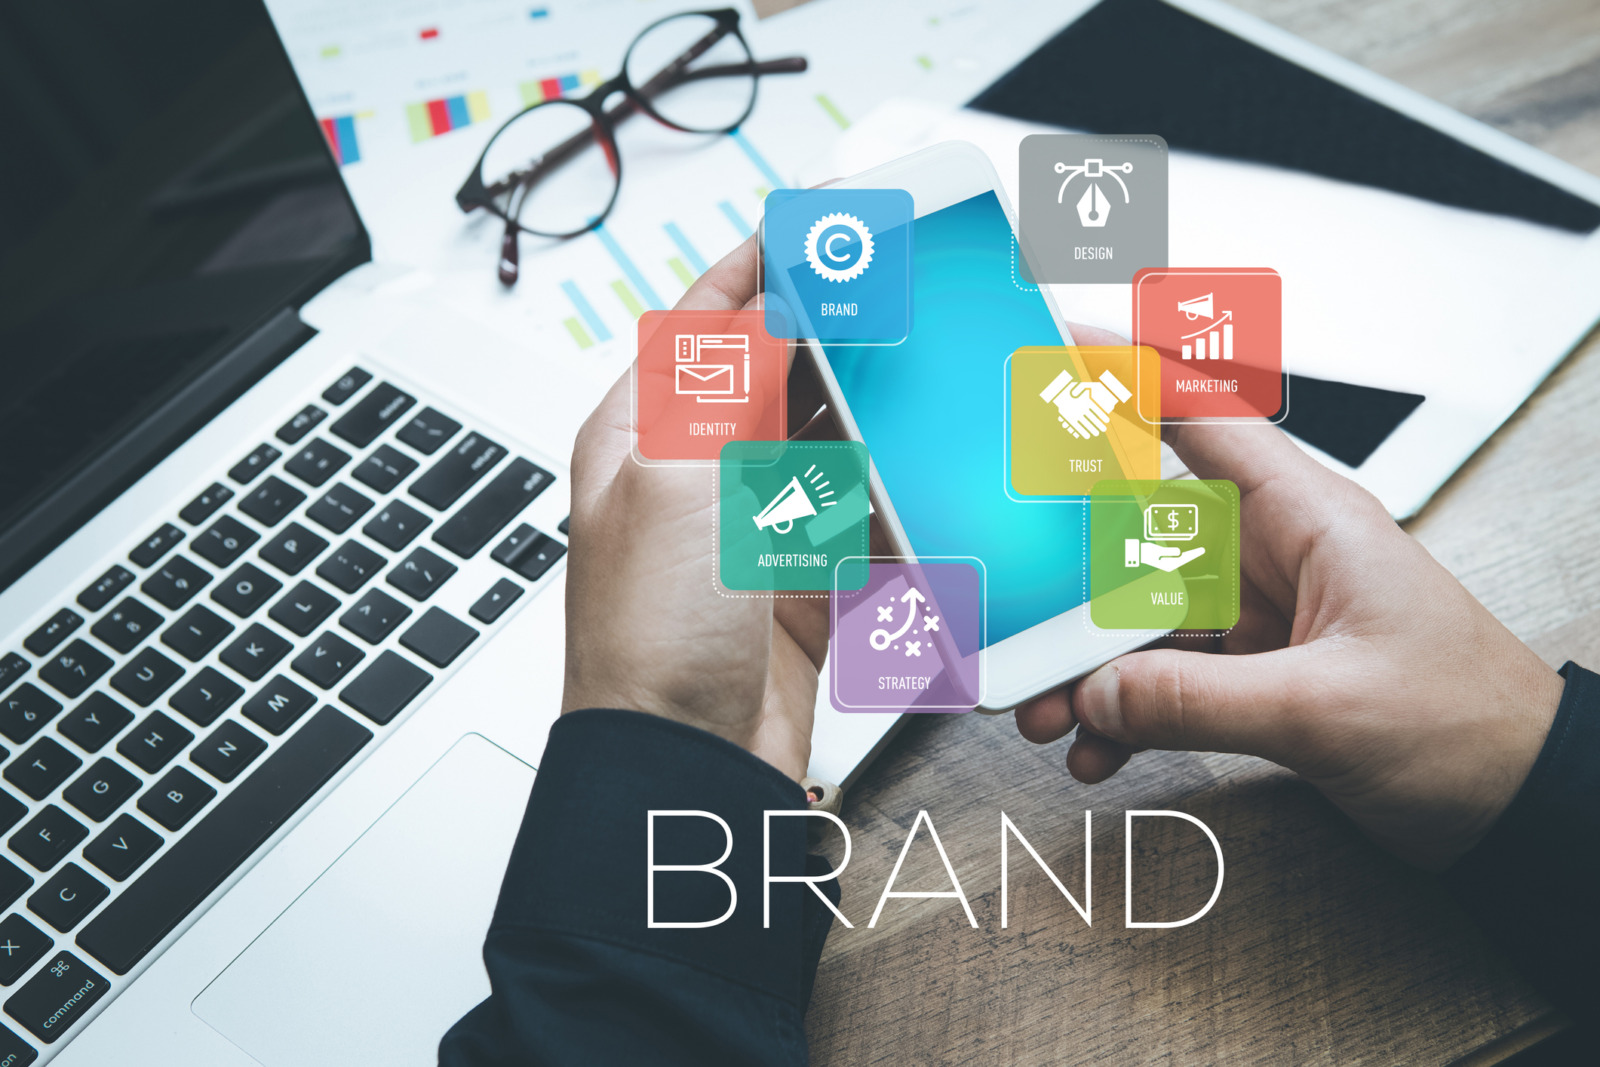 3 Easy Ways to Boost Your Employer Brand